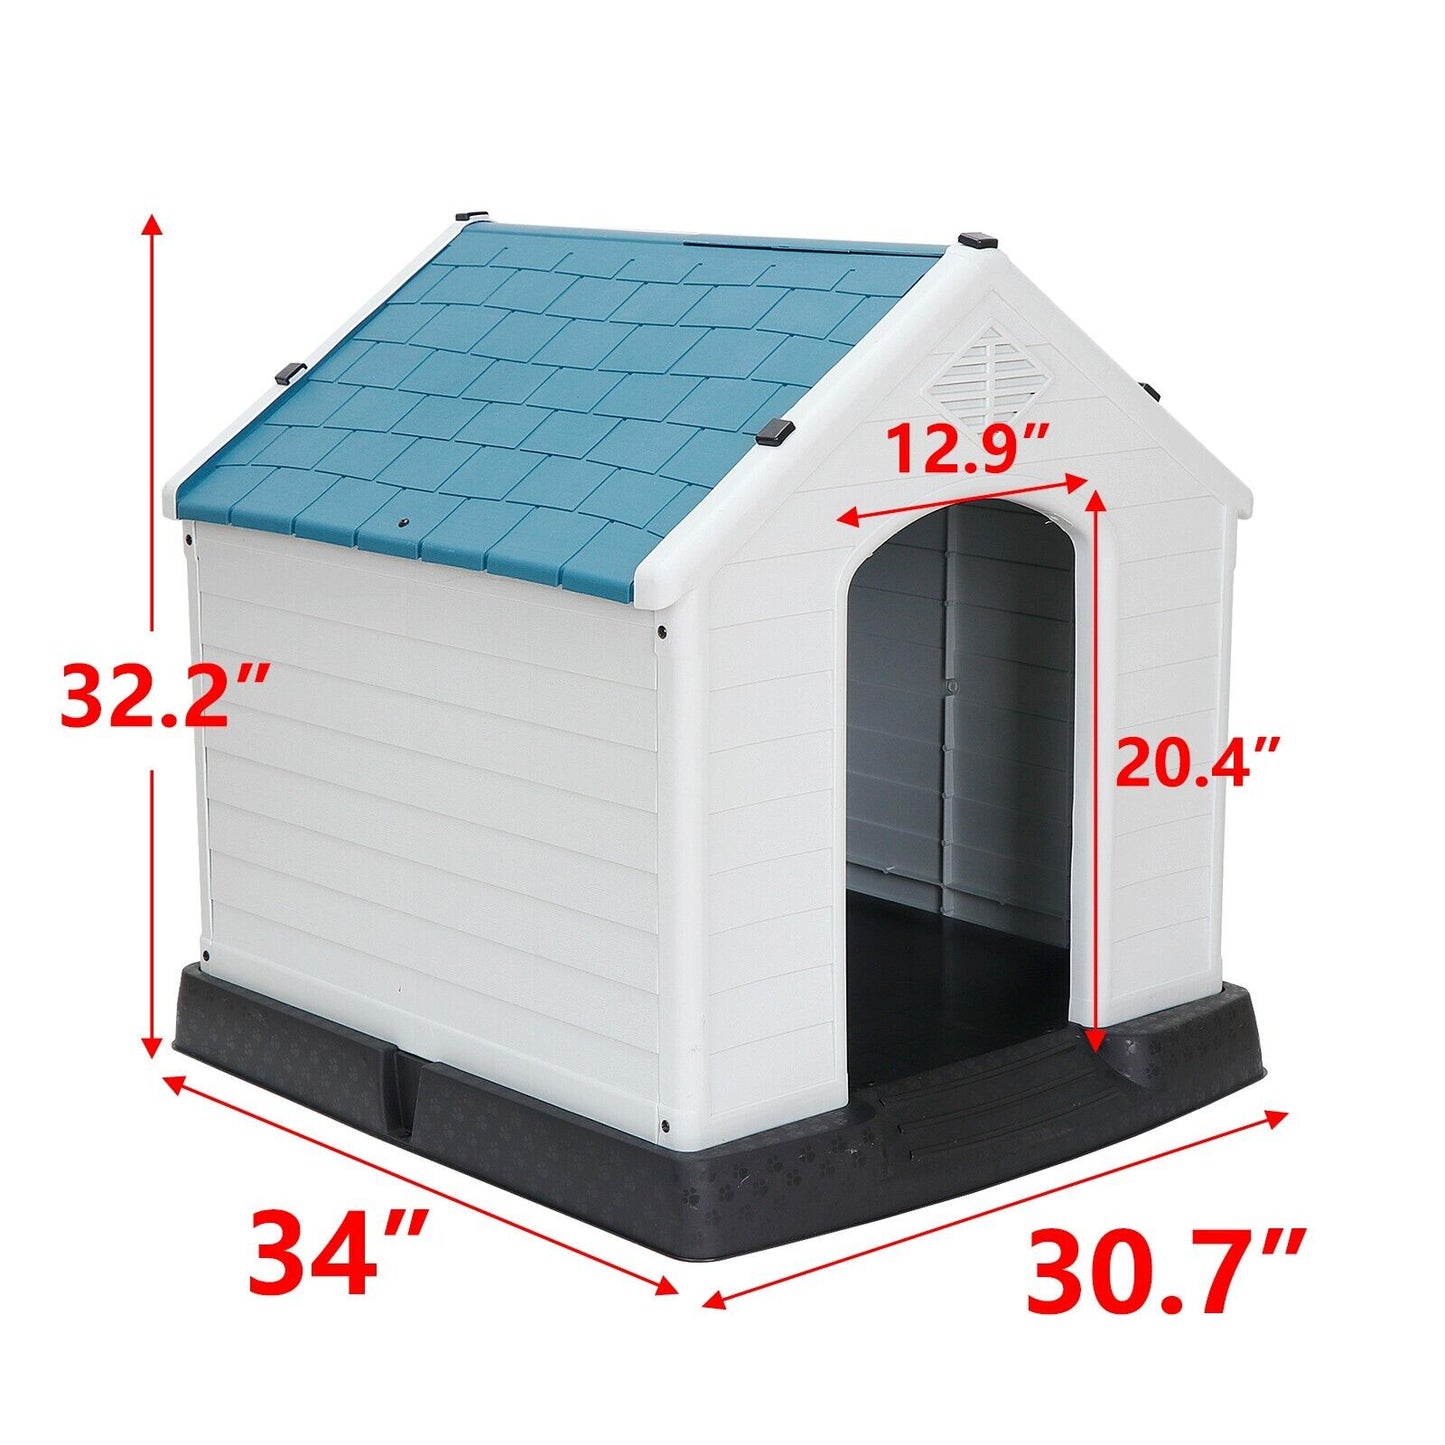 32" Plastic Outdoor Large Dog House Pet Puppy Kennel Weather & Water Resistant